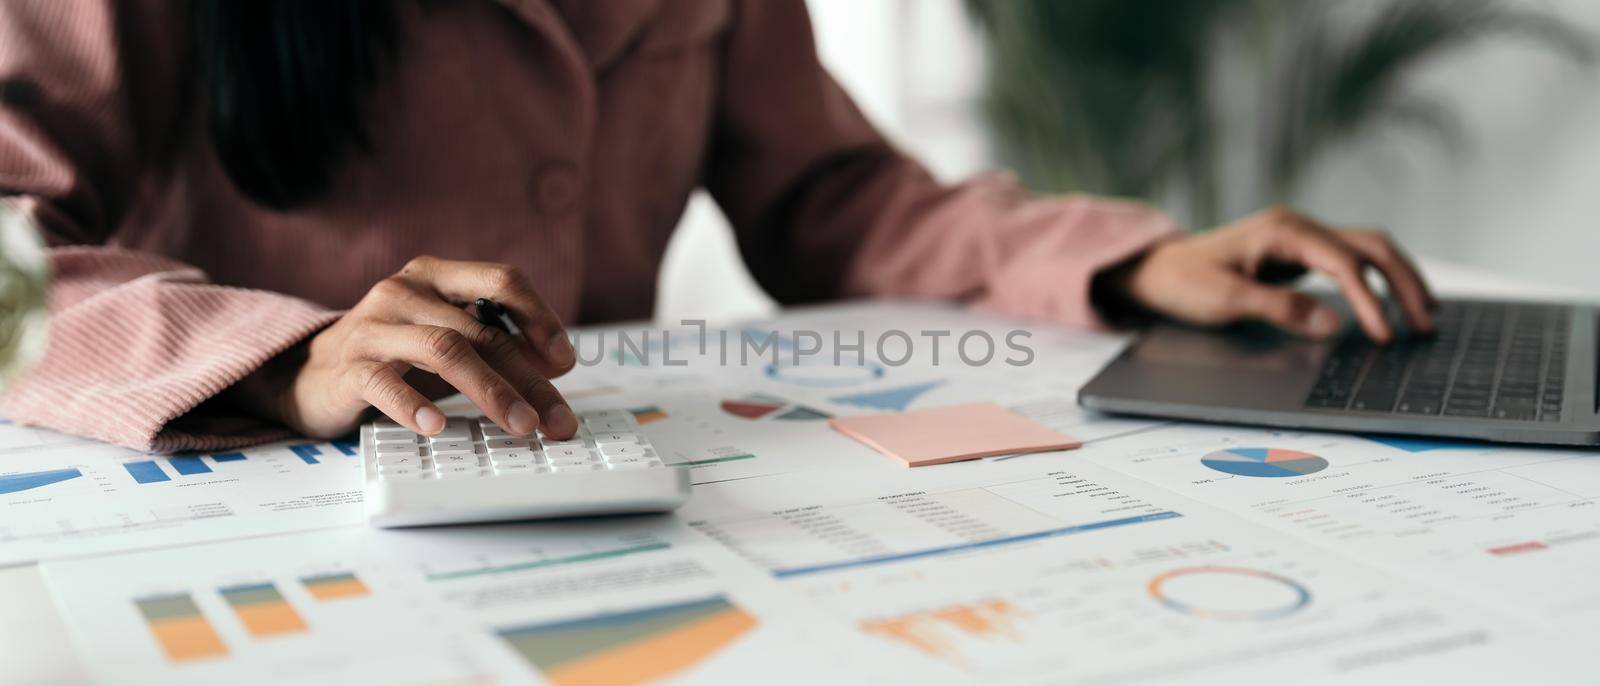 Close up hand of woman using computer calculating household finances or taxes on machine, female manage home family expenditures, using calculator, make payment on laptop.